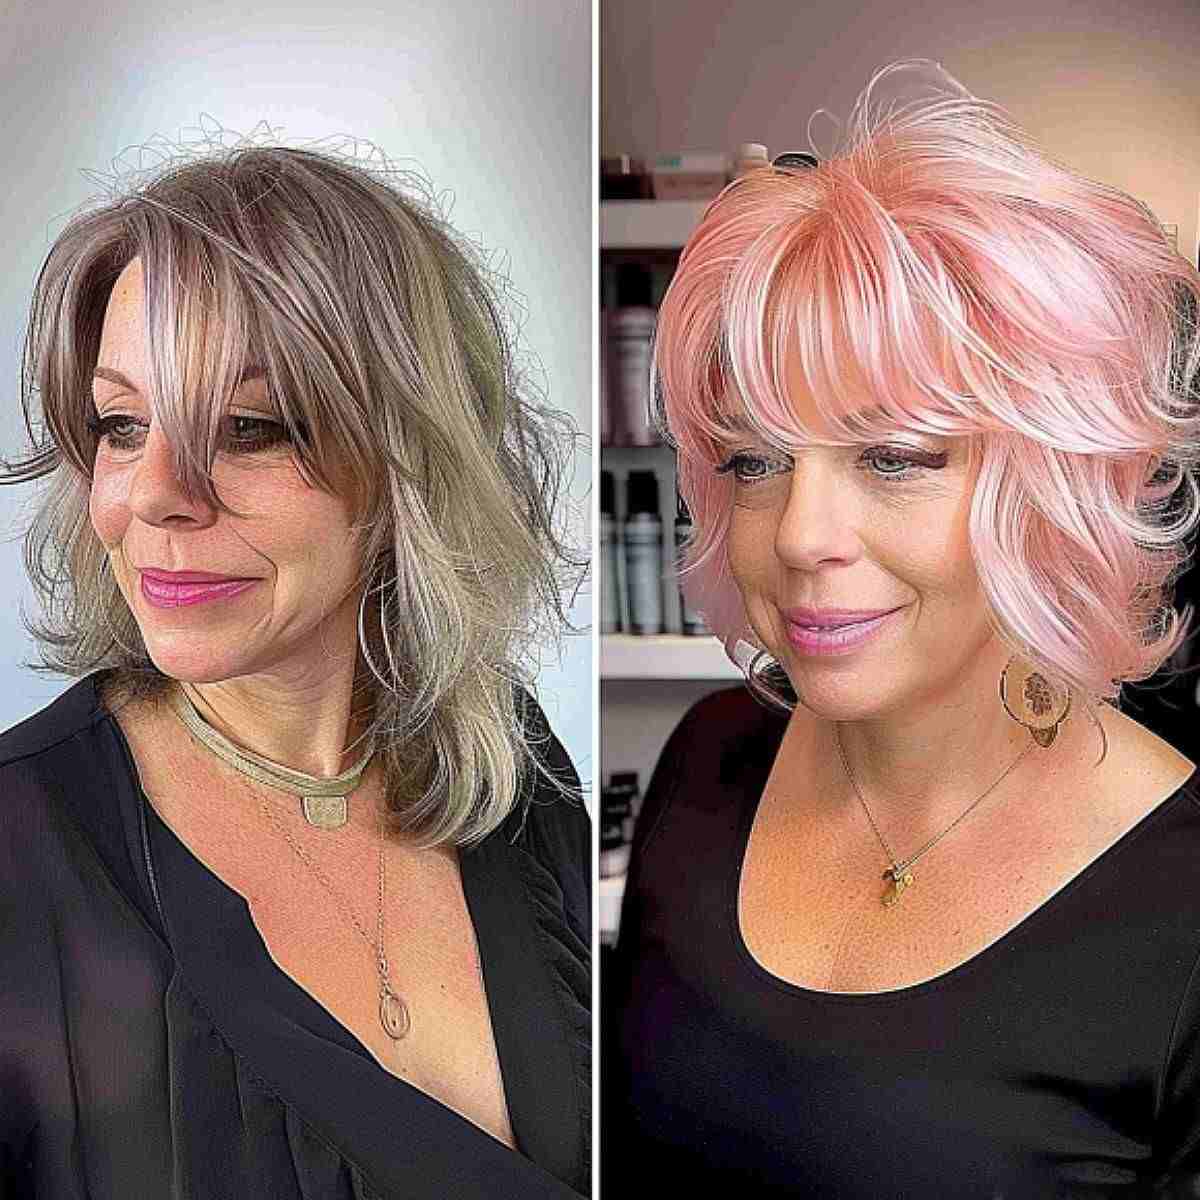 Pink and Feathered Bob Cut for Ladies in their 40s